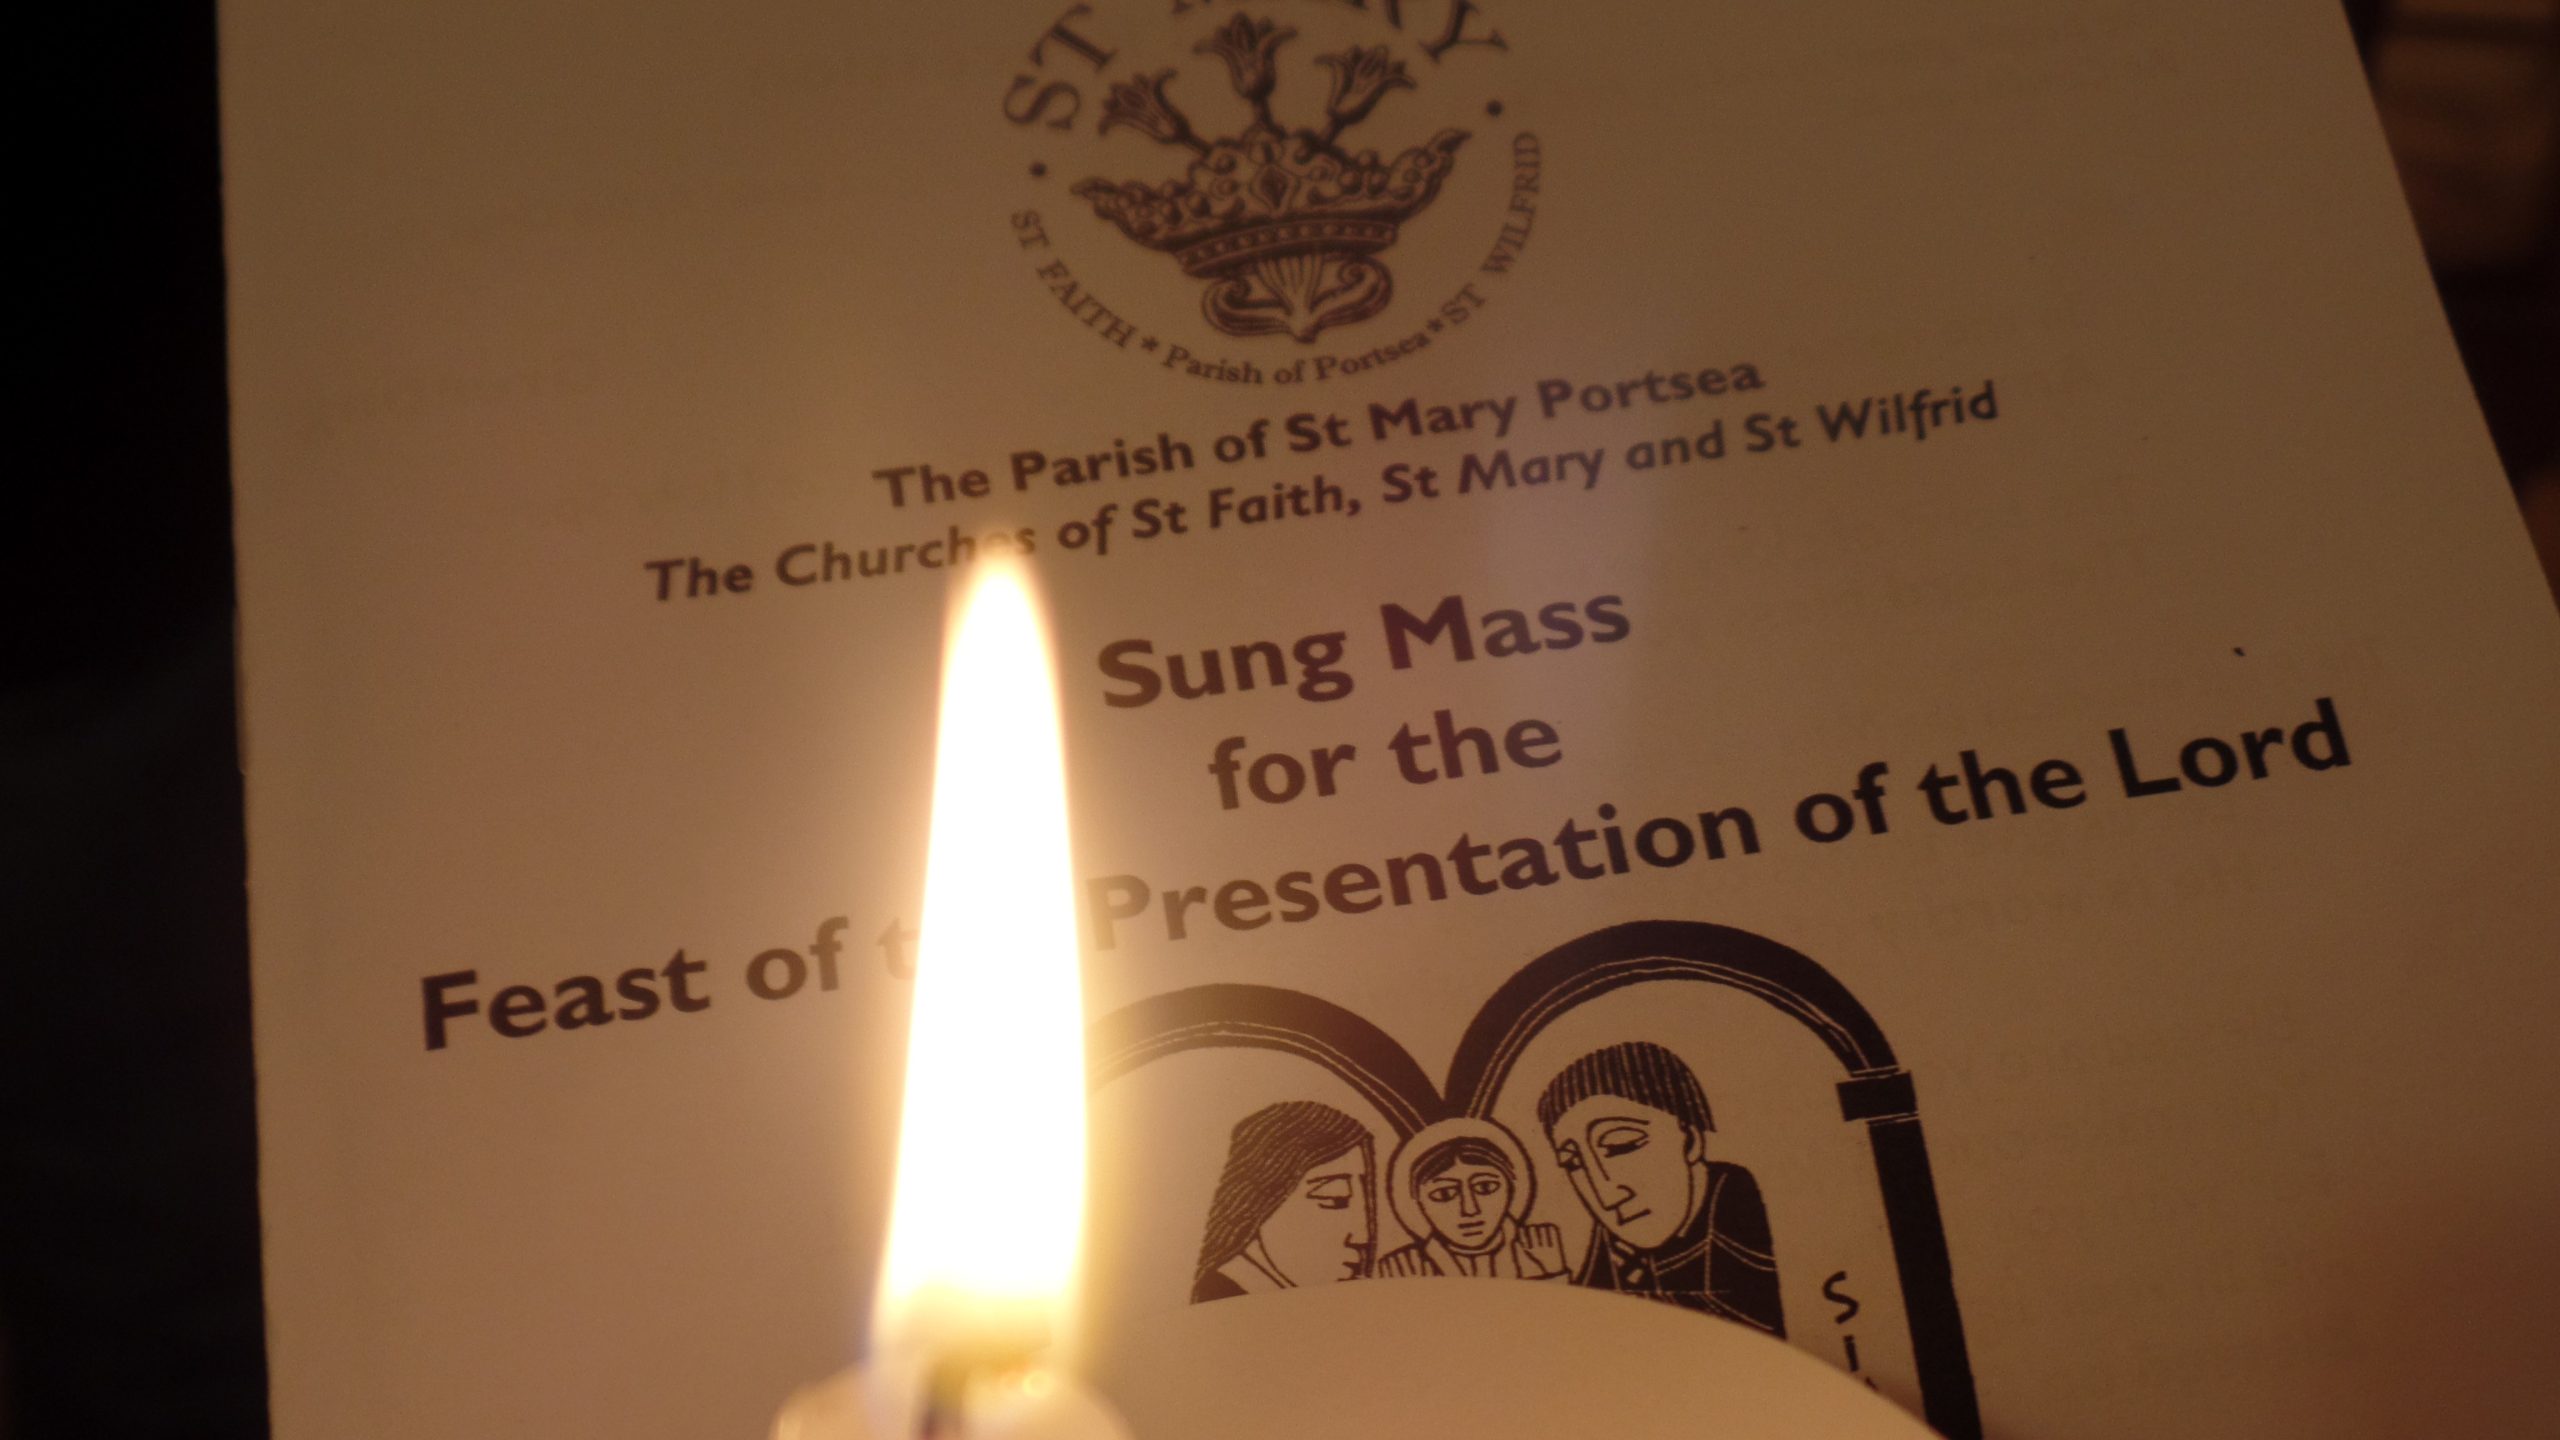 A candle with the Candlemas order of service